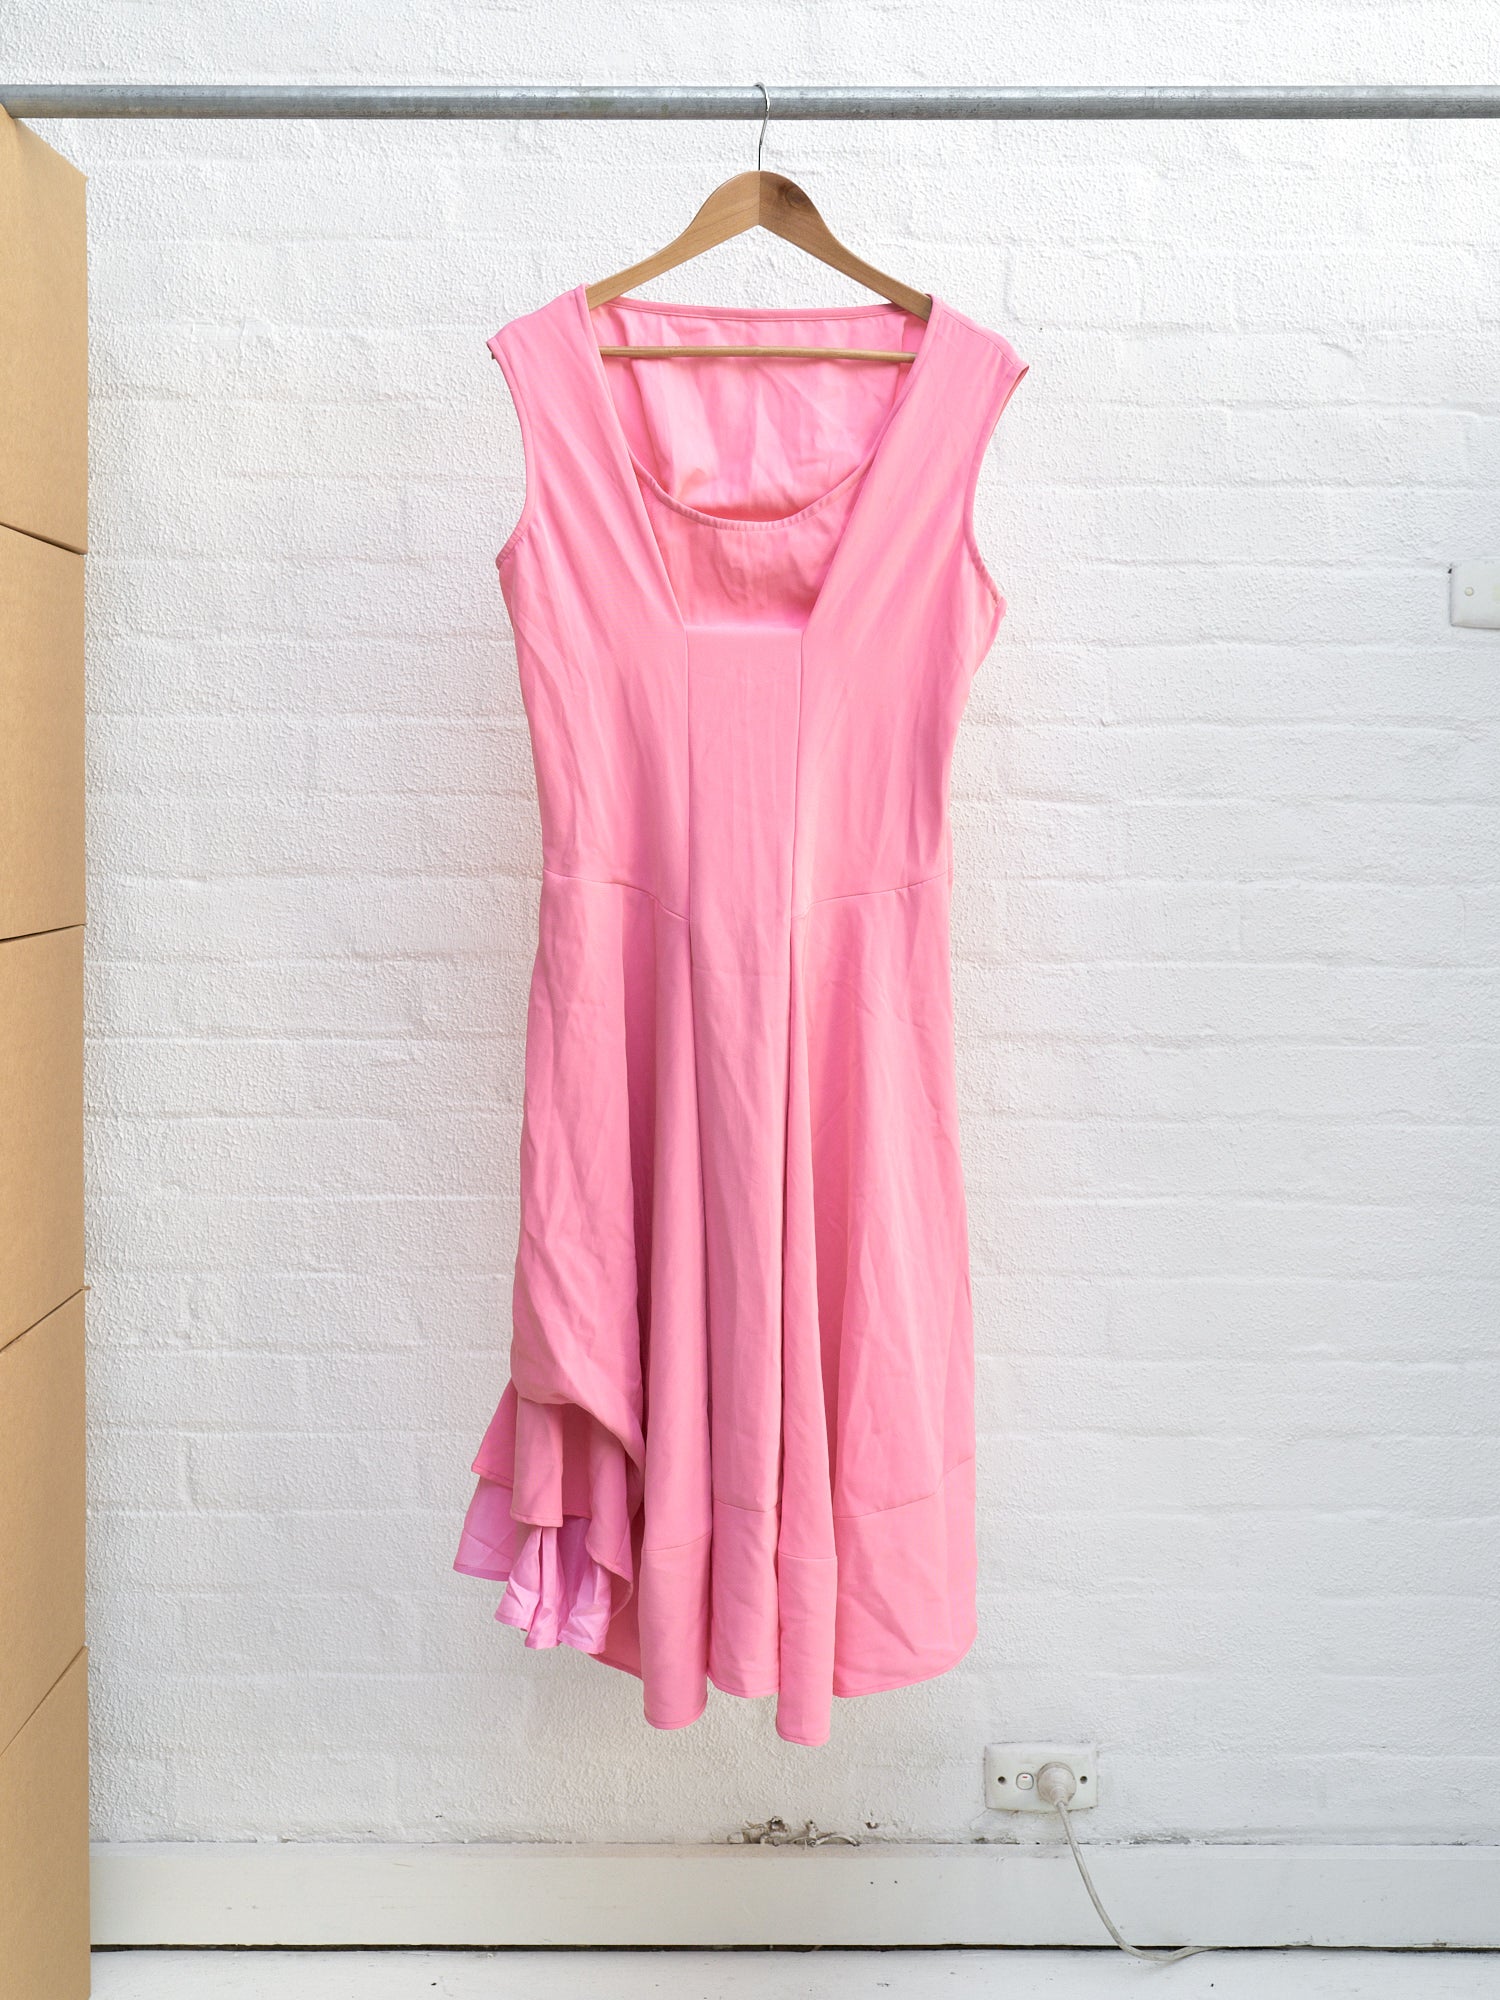 Comme des Garcons 1995 pink polyester flared ruffled sleeveless dress - size M